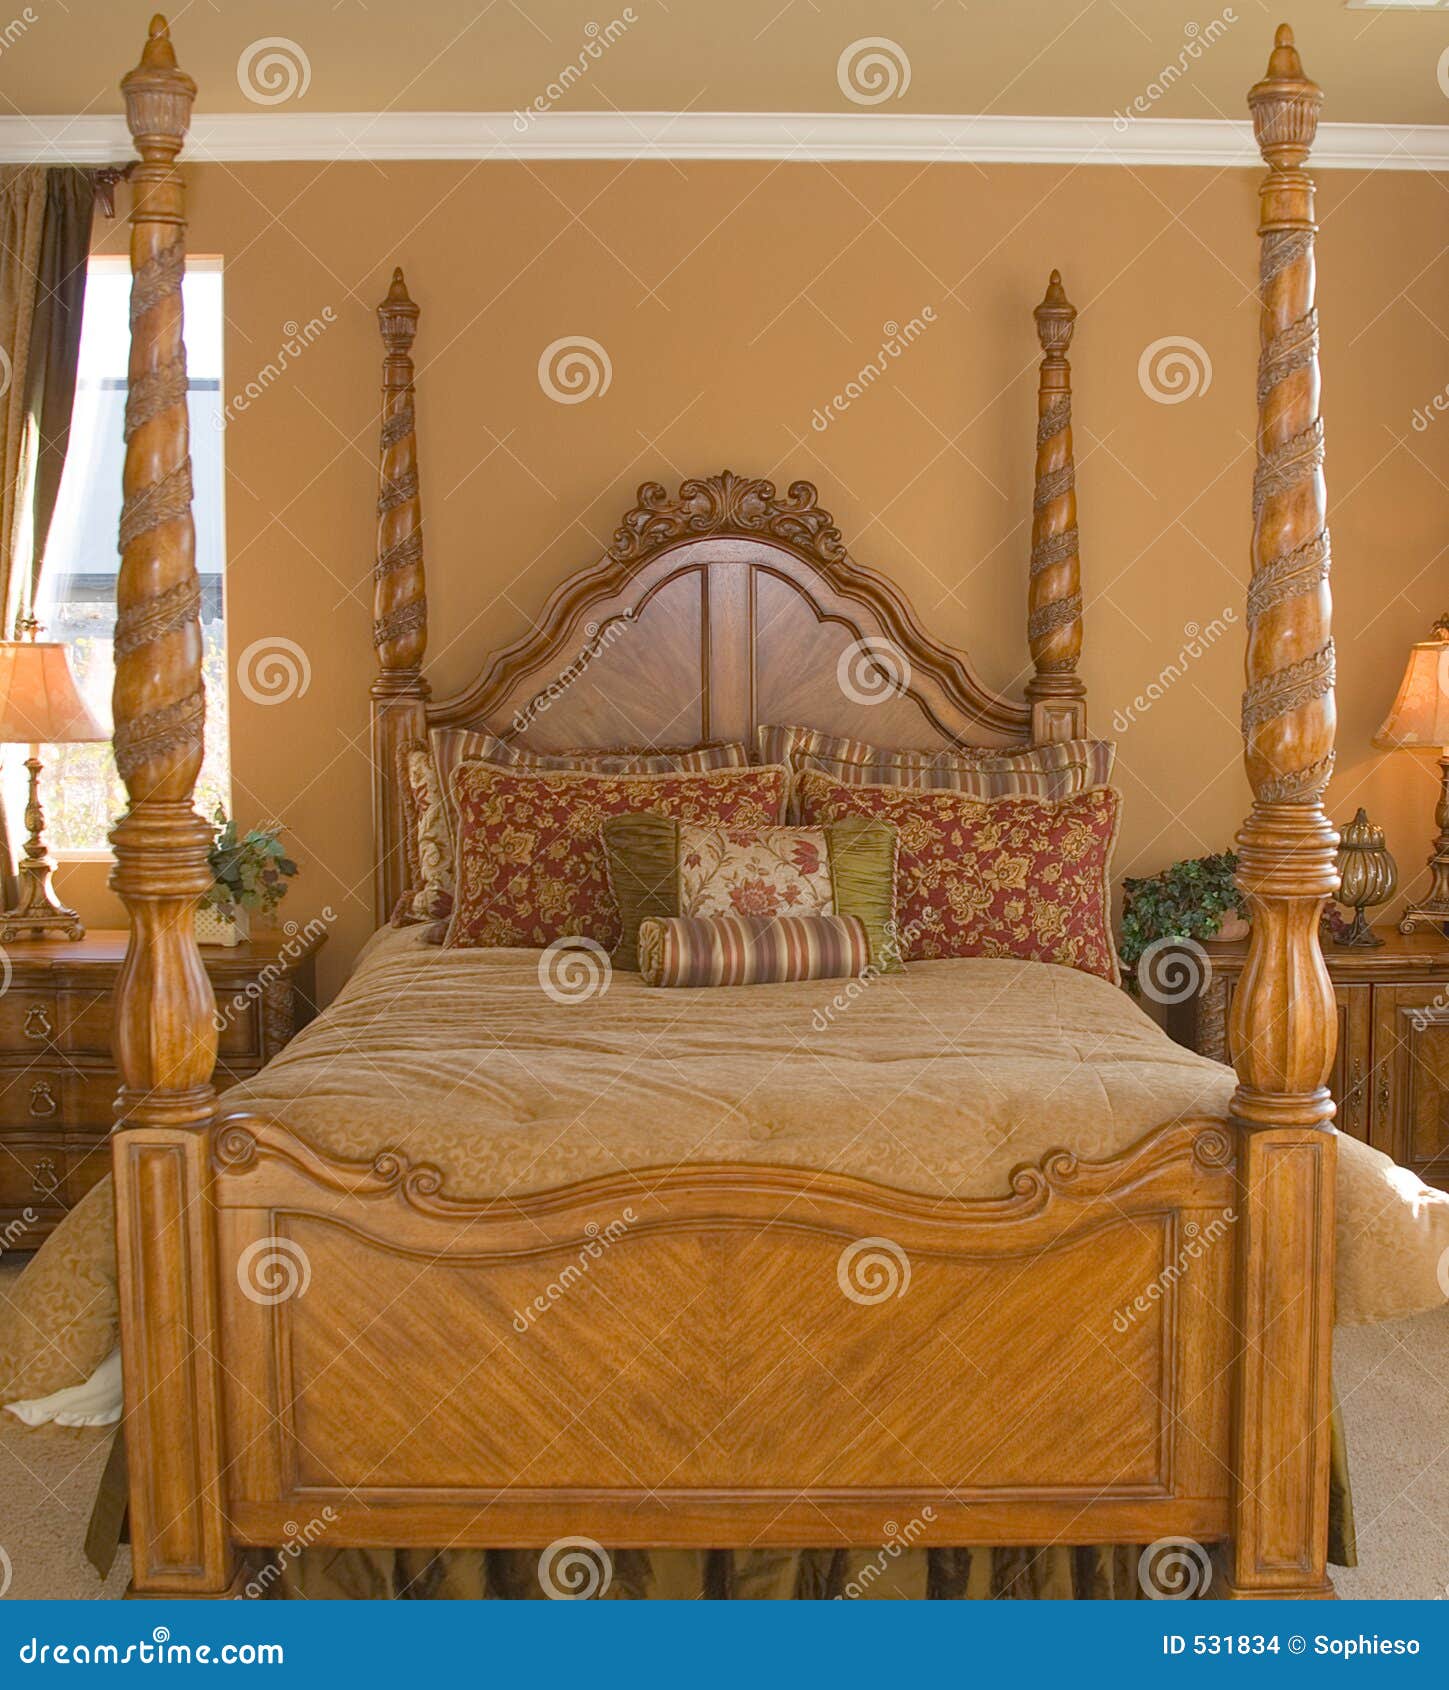 Four Poster Bed stock photo. Image of fashionable, design ...